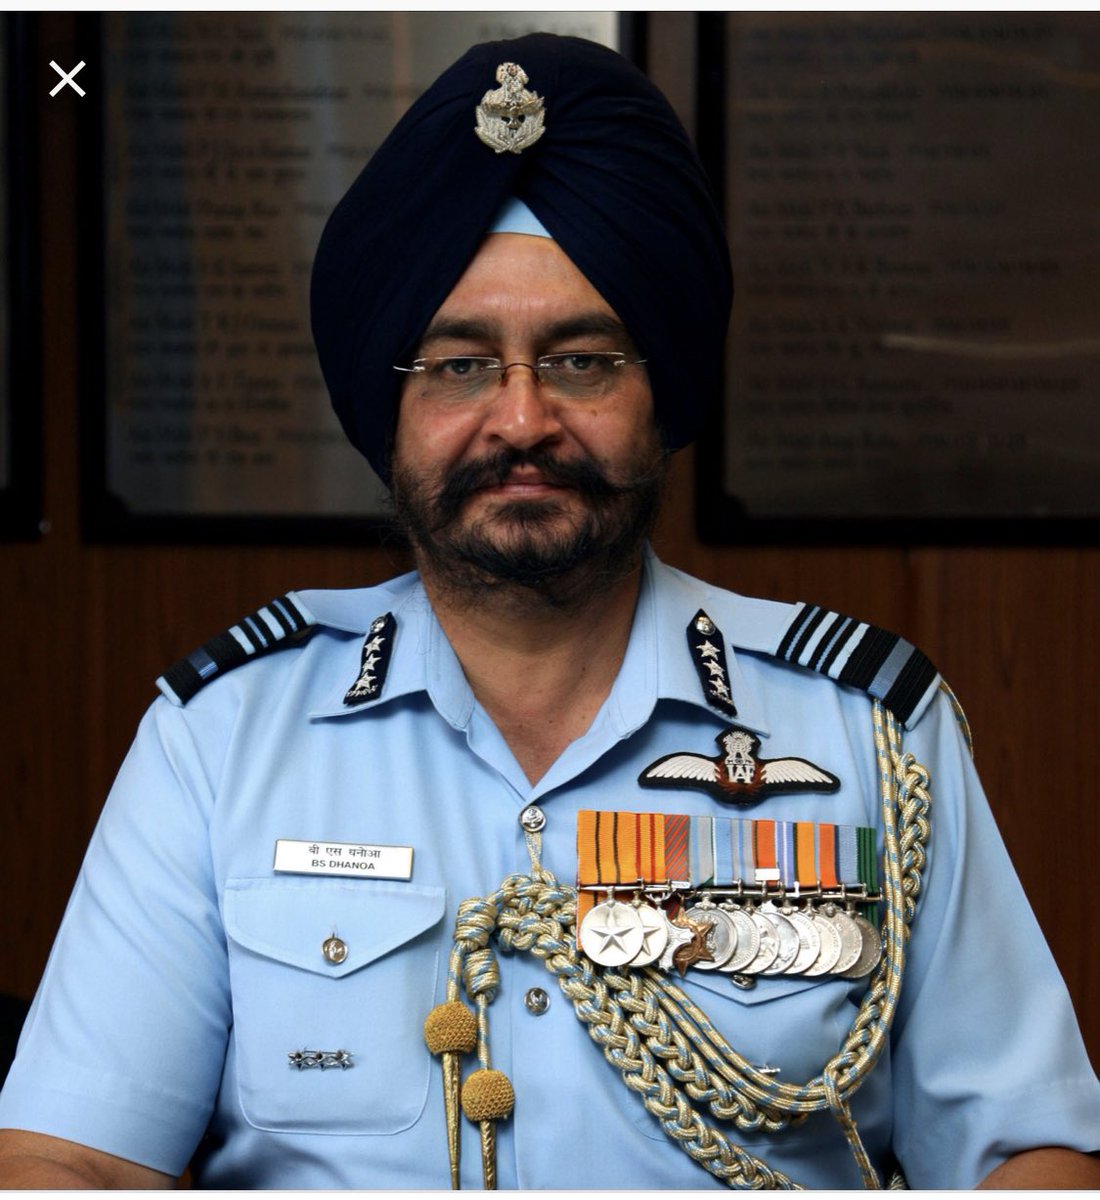 Big salute to Air Chief Marshal Birender Singh Dhanoa and his #IndianAirForce Team

#IndianStrikesBack #Surgicalstrike2